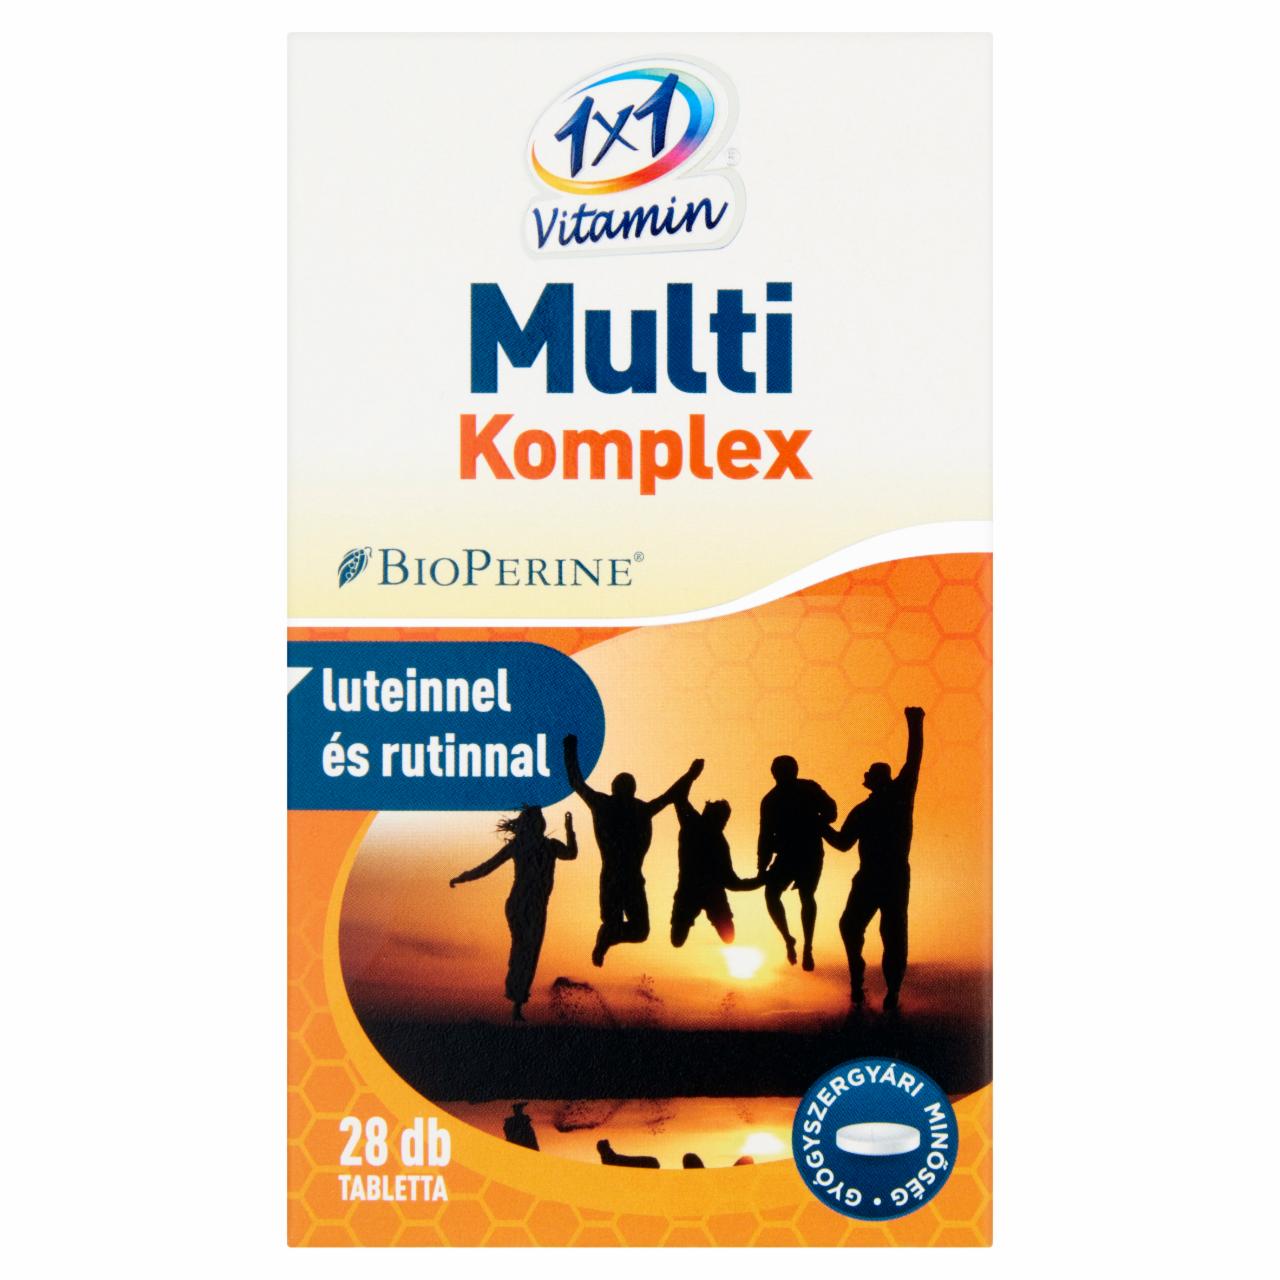 Photo - 1x1 Vitamin Multi Complex Supplement Tablets with Lutein and Rutin 28 pcs 14 g